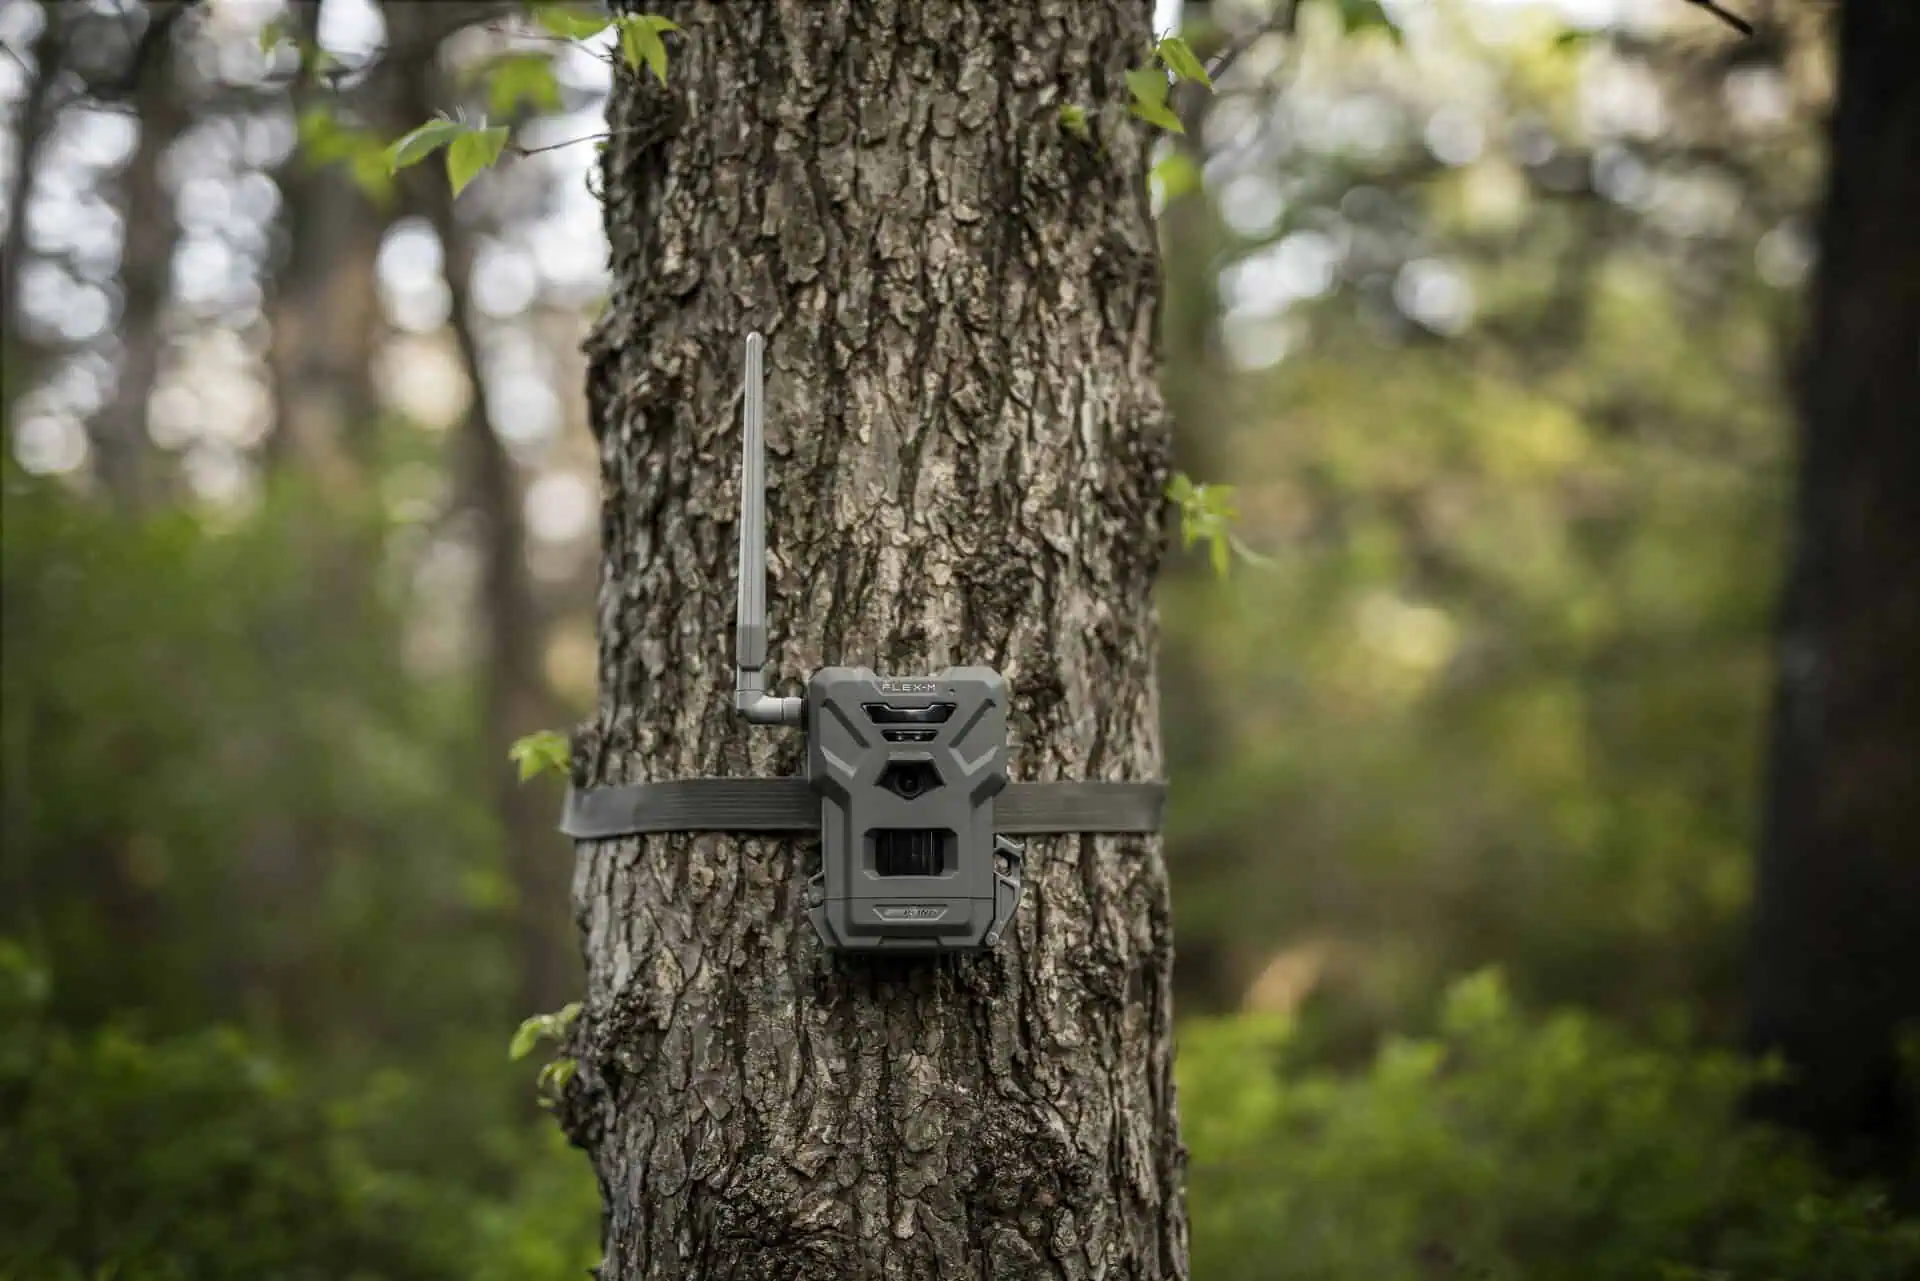 Spypoint Trail Camera FLEX-M Twin Pack